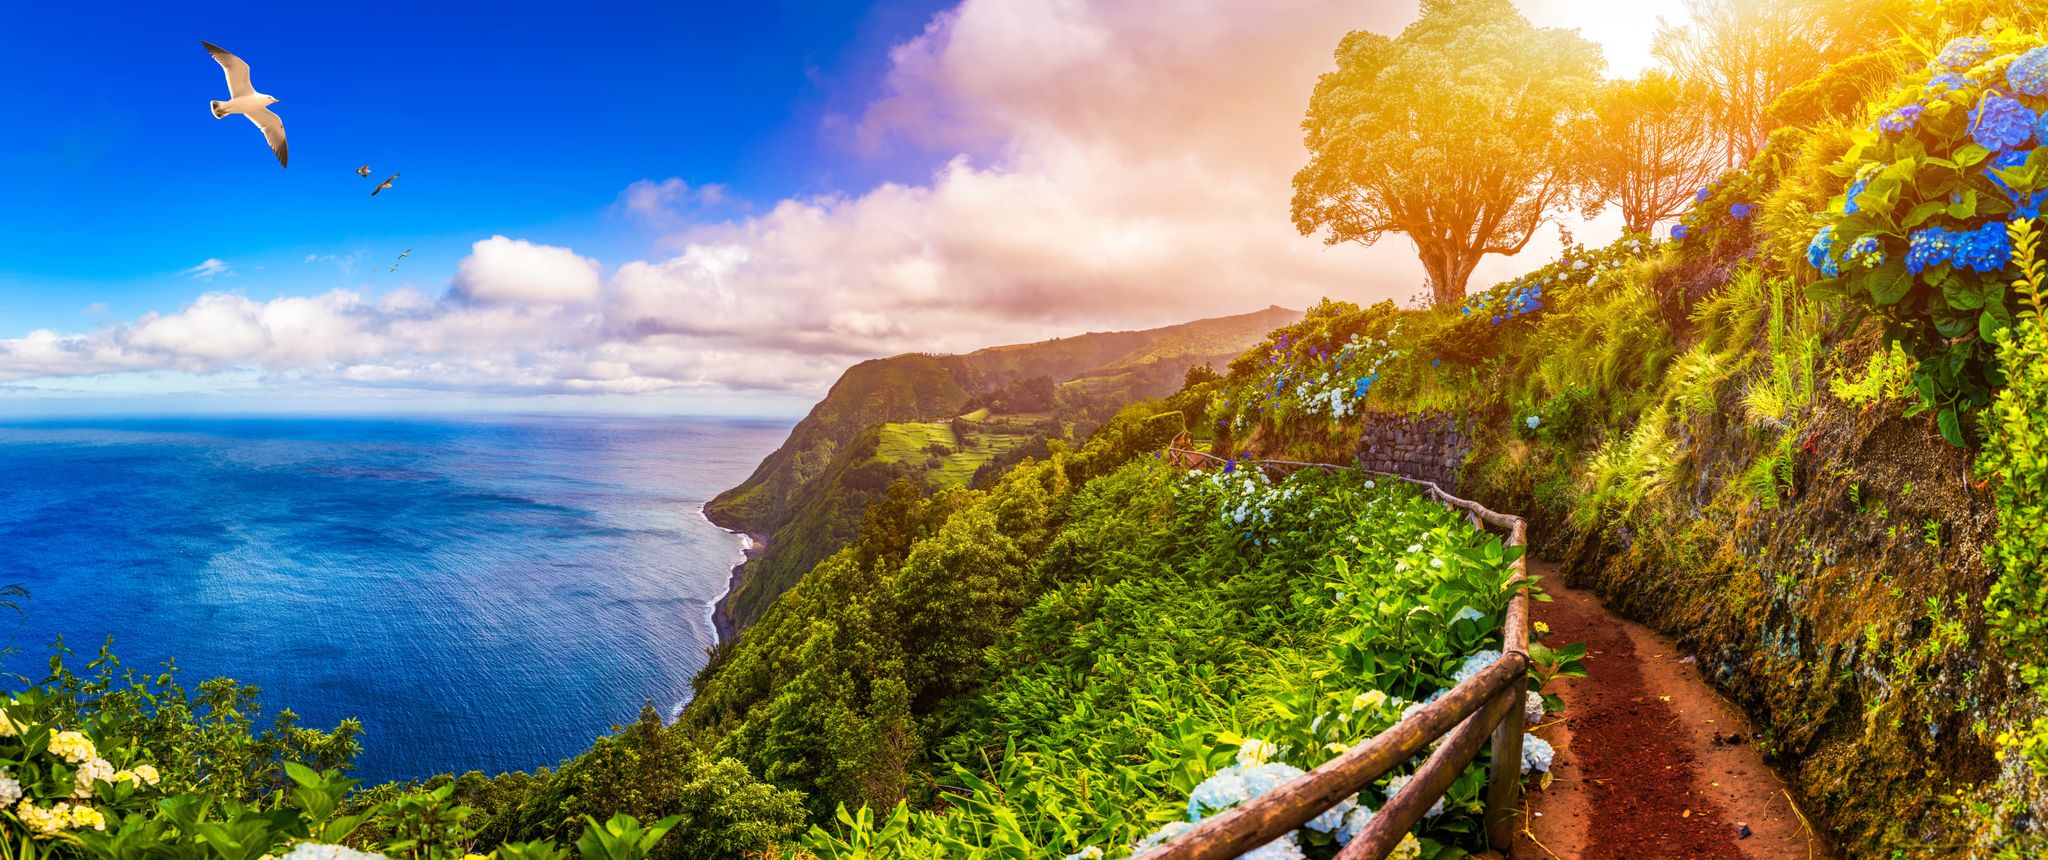 Sao Miguel Island Tours Azores Islands Collection